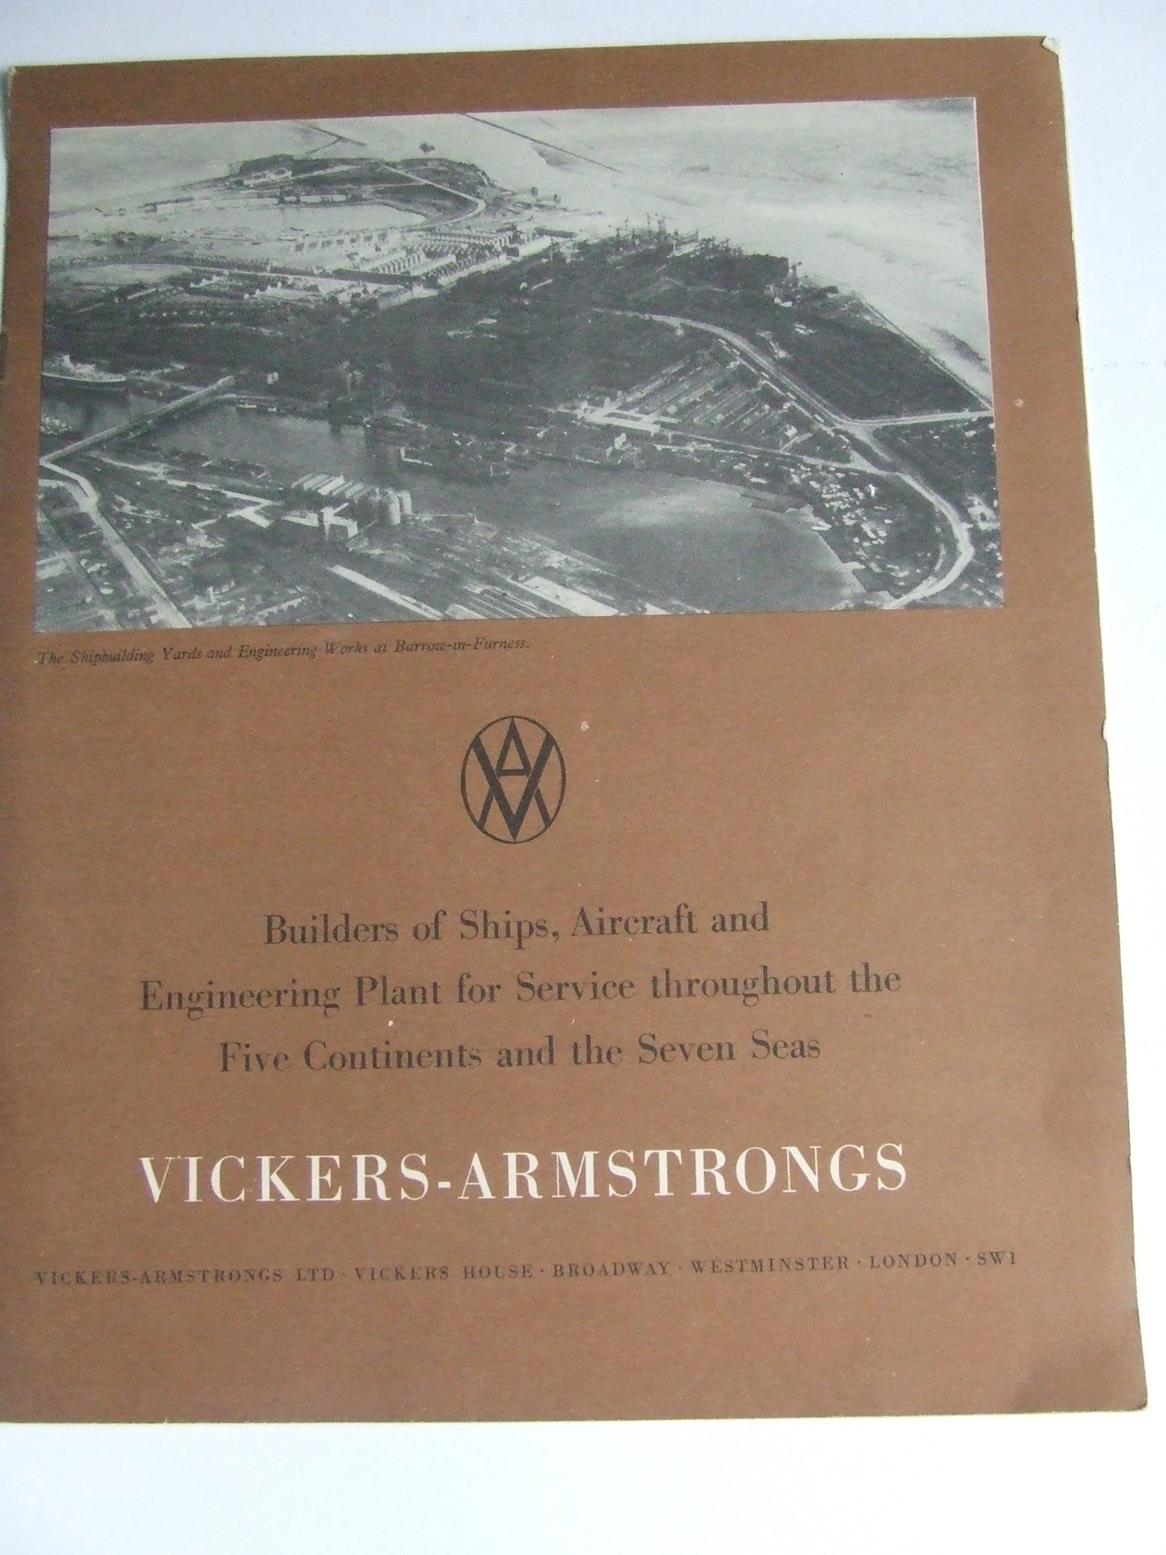 Vickers-Armstrongs